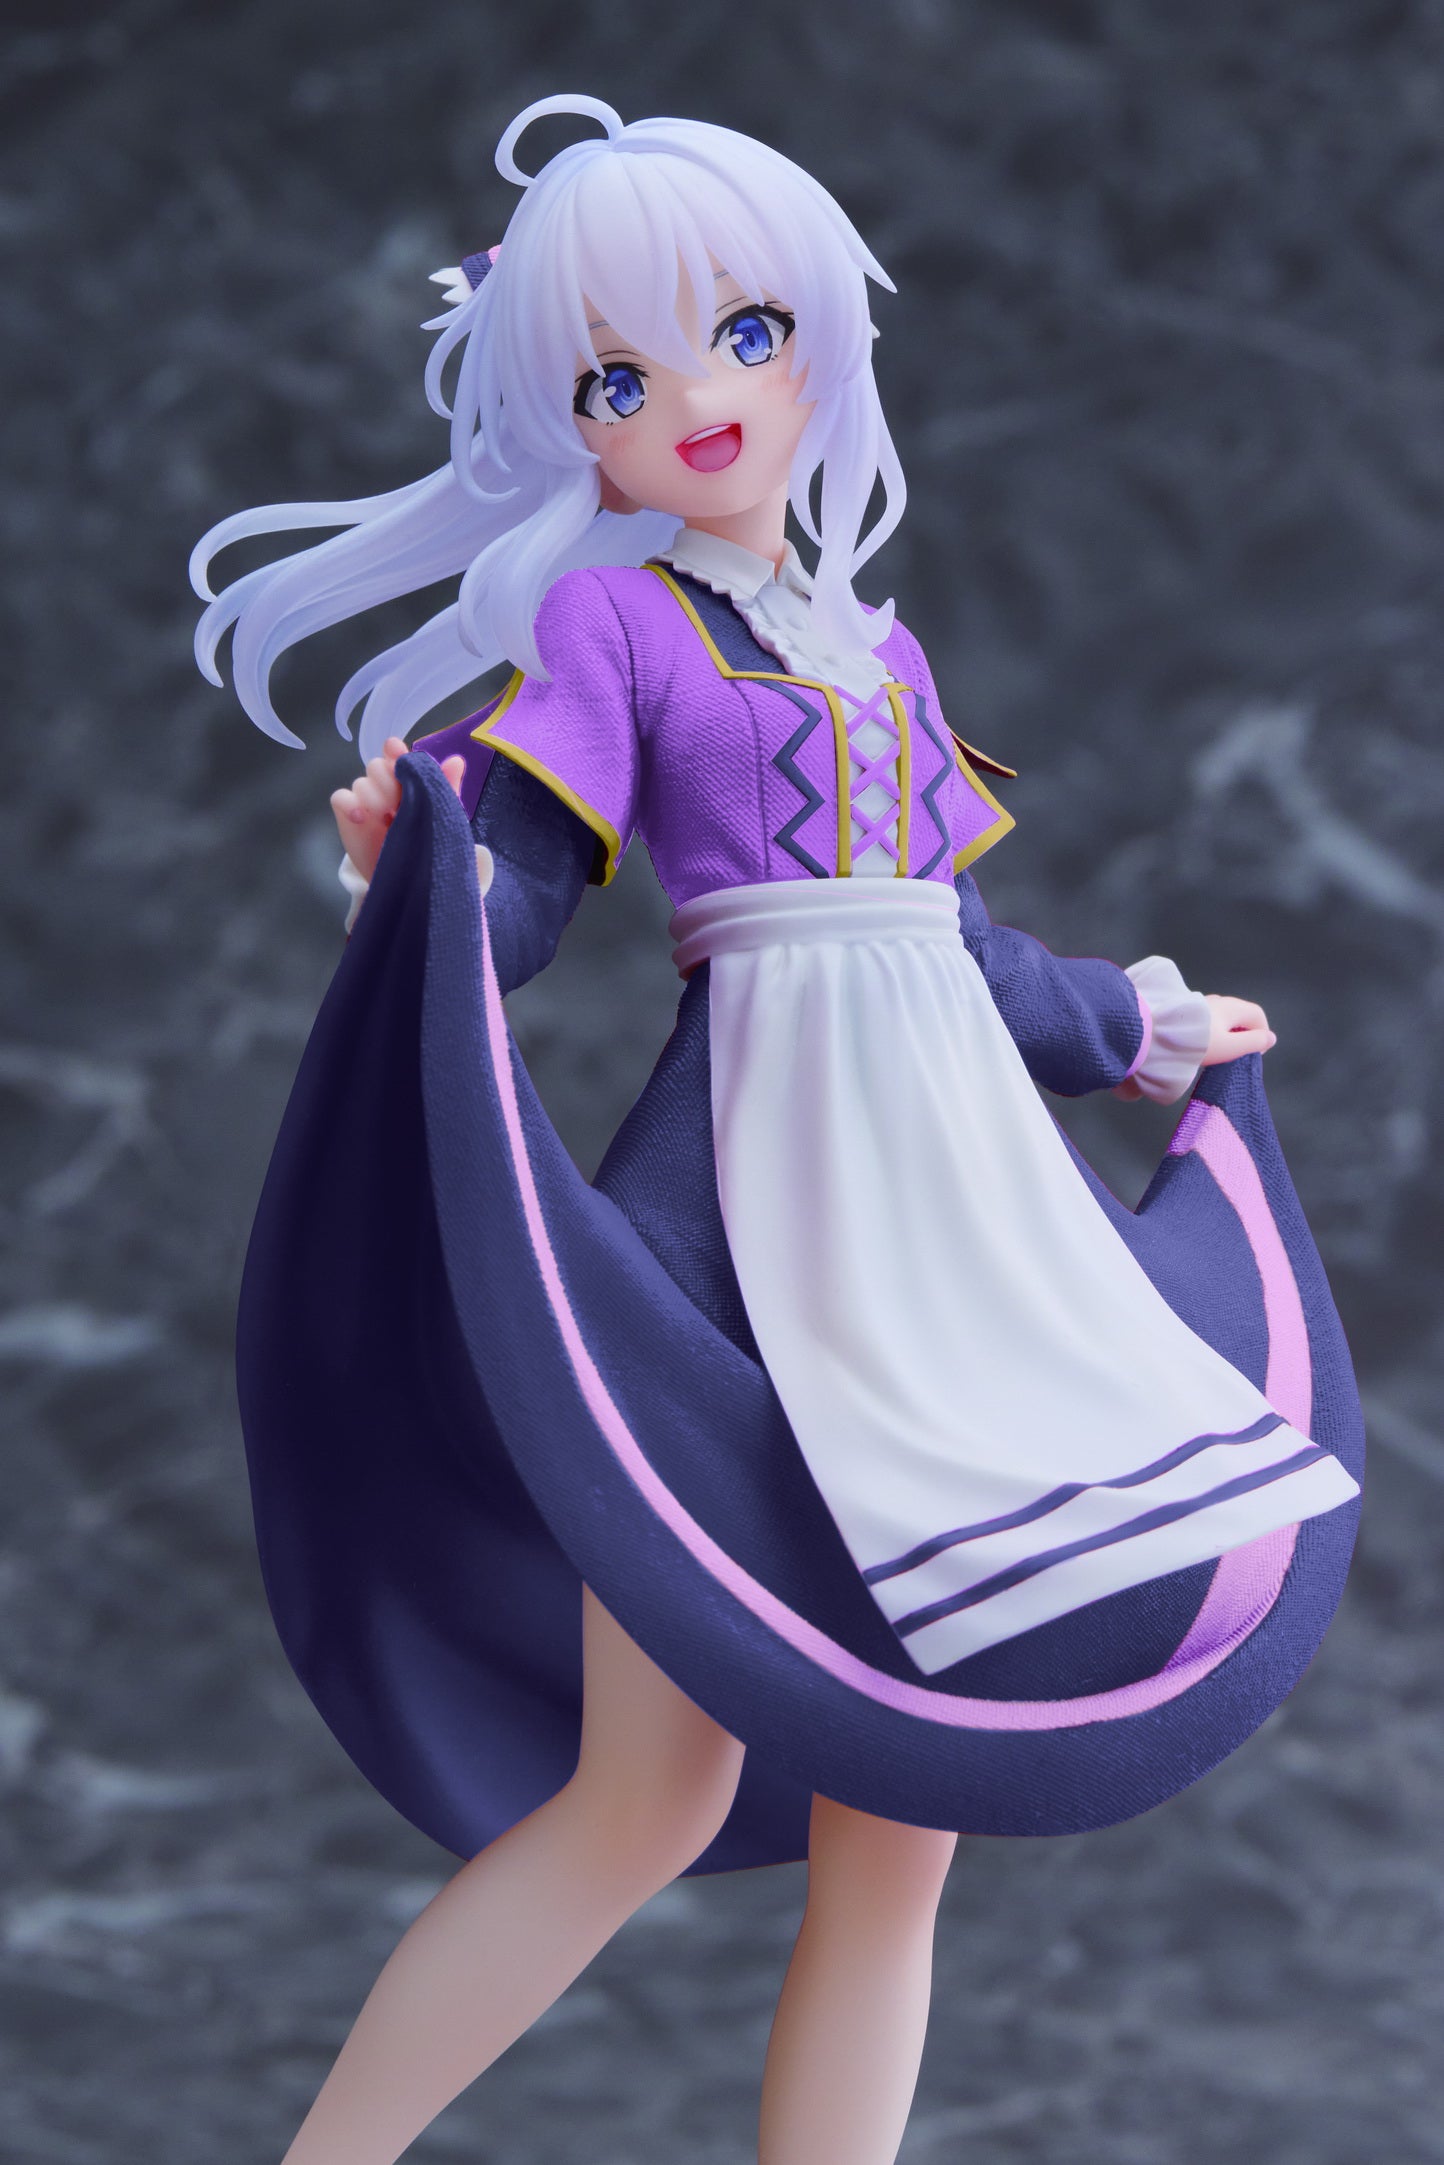 PRE-ORDER Taito - Wandering Witch: The Journey of Elaina Coreful Figure - Elaina: Grape-Stomping Girl Ver. Renewal Edition